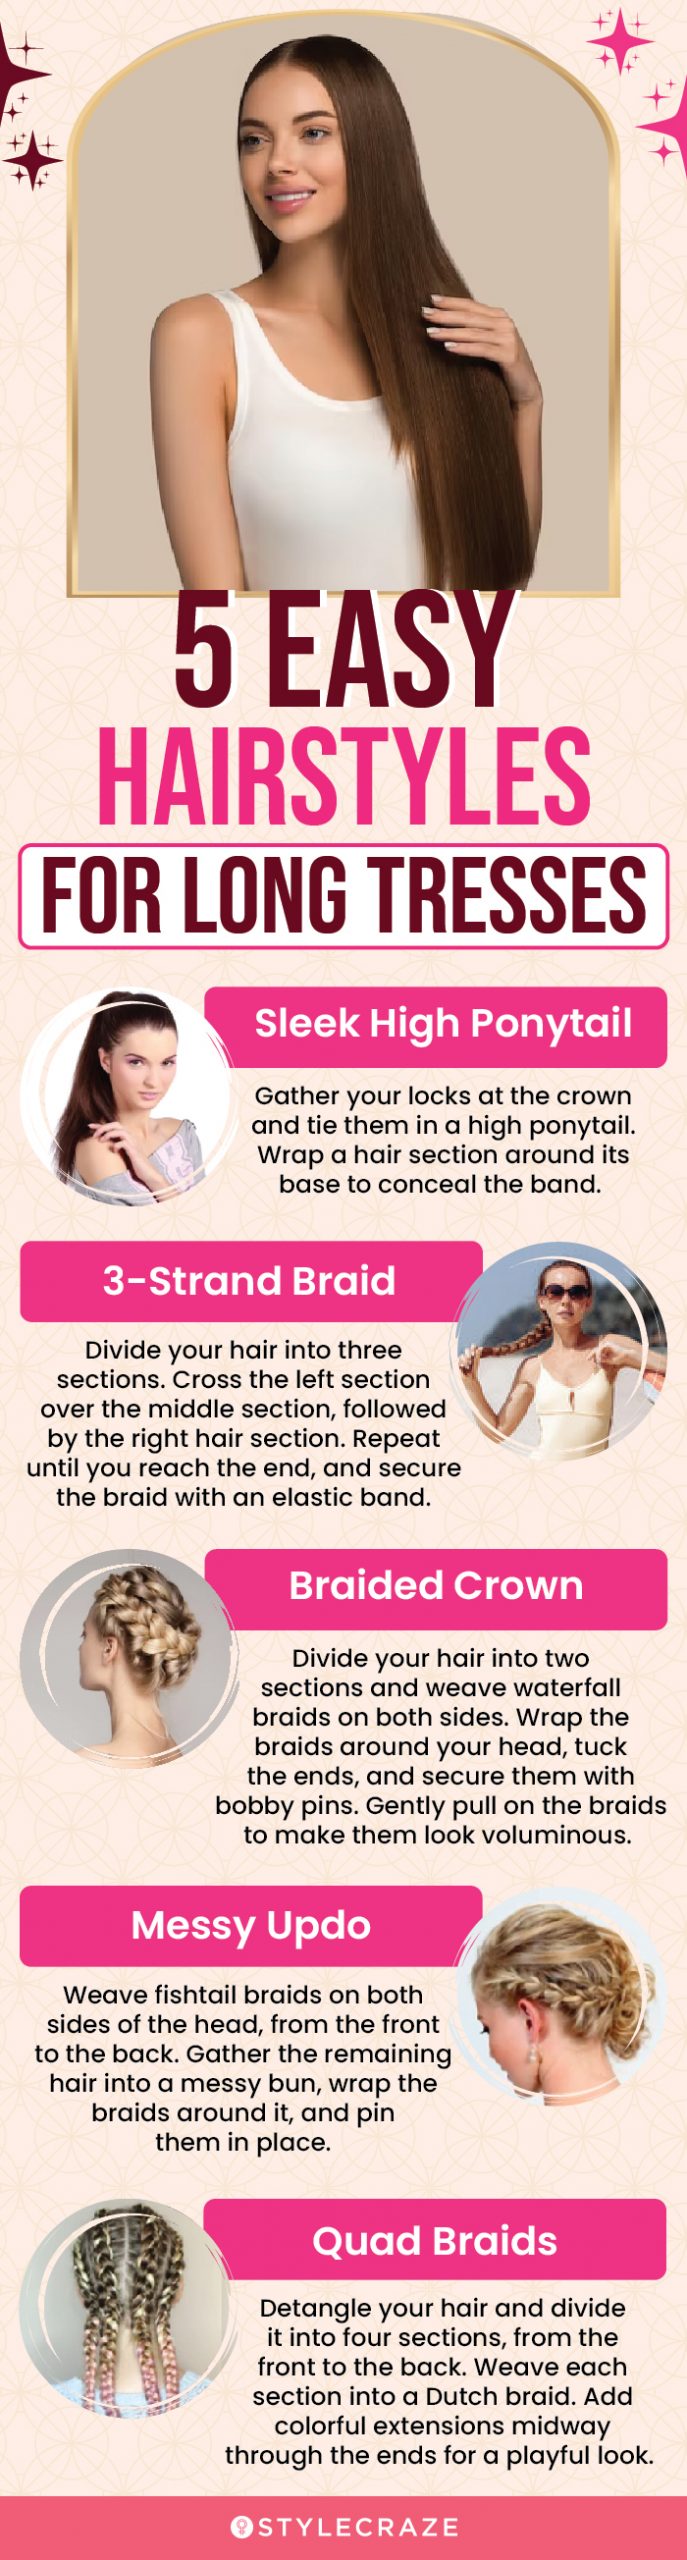 5 easy hairstyles for long tresses (infographic)